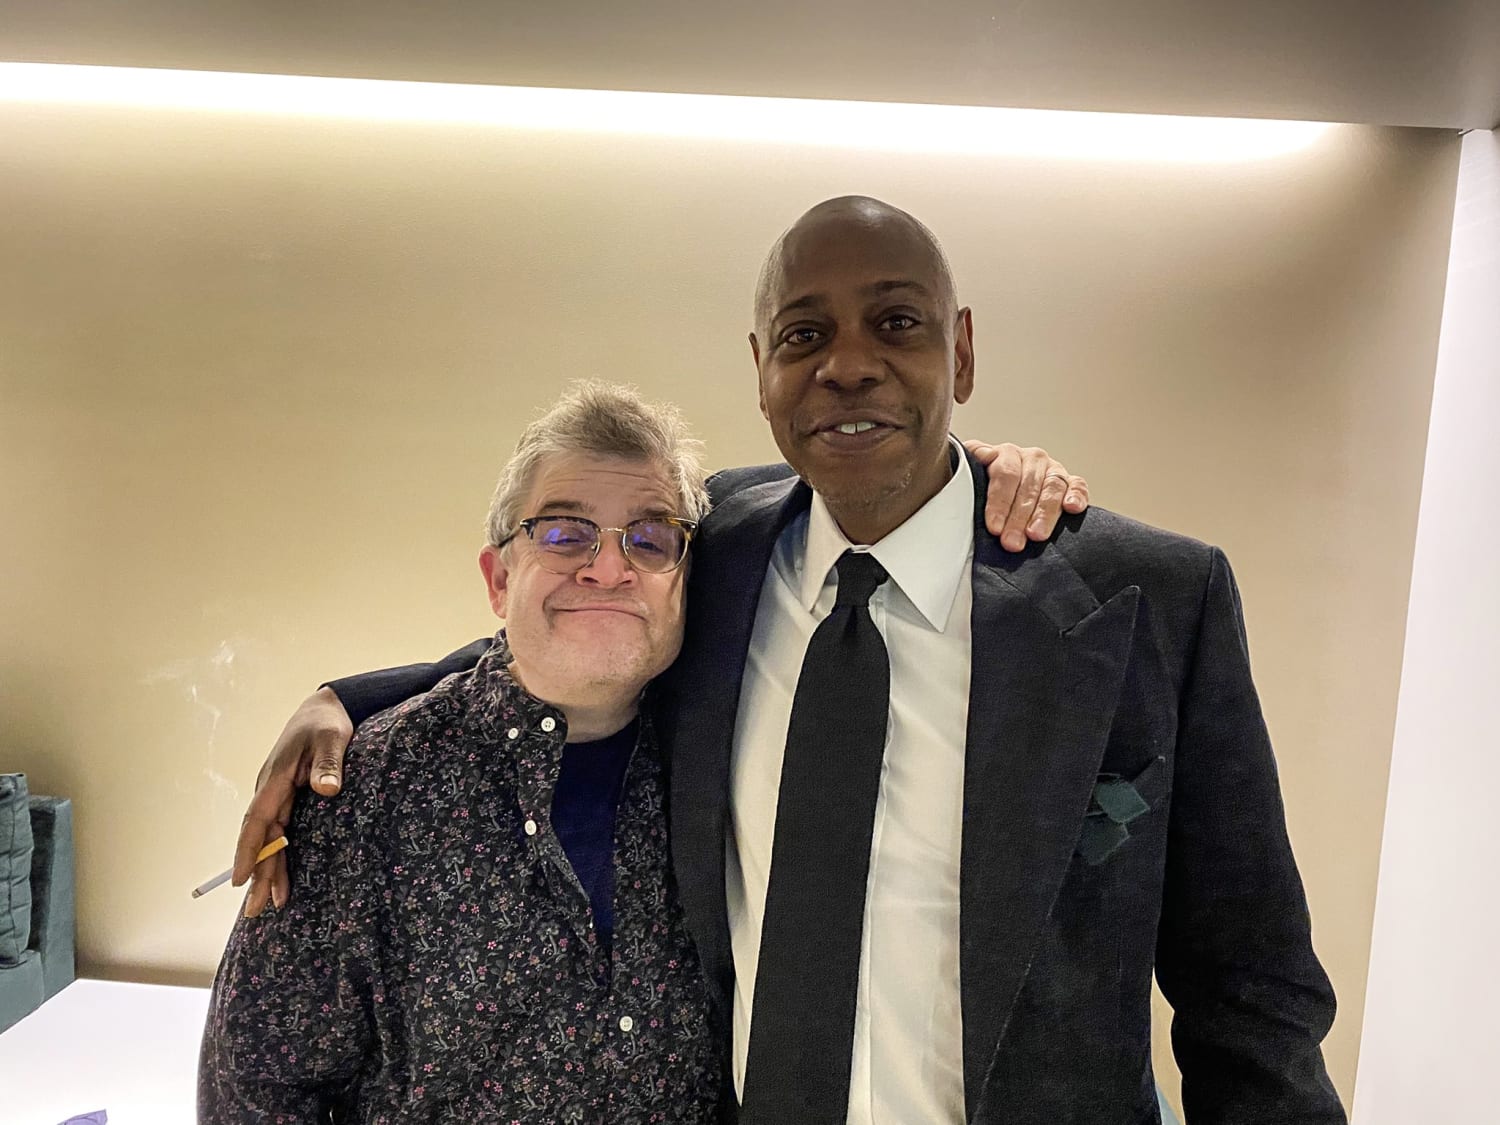 Patton Oswalt defends, apologizes for New Year’s Eve photo with Dave Chappelle